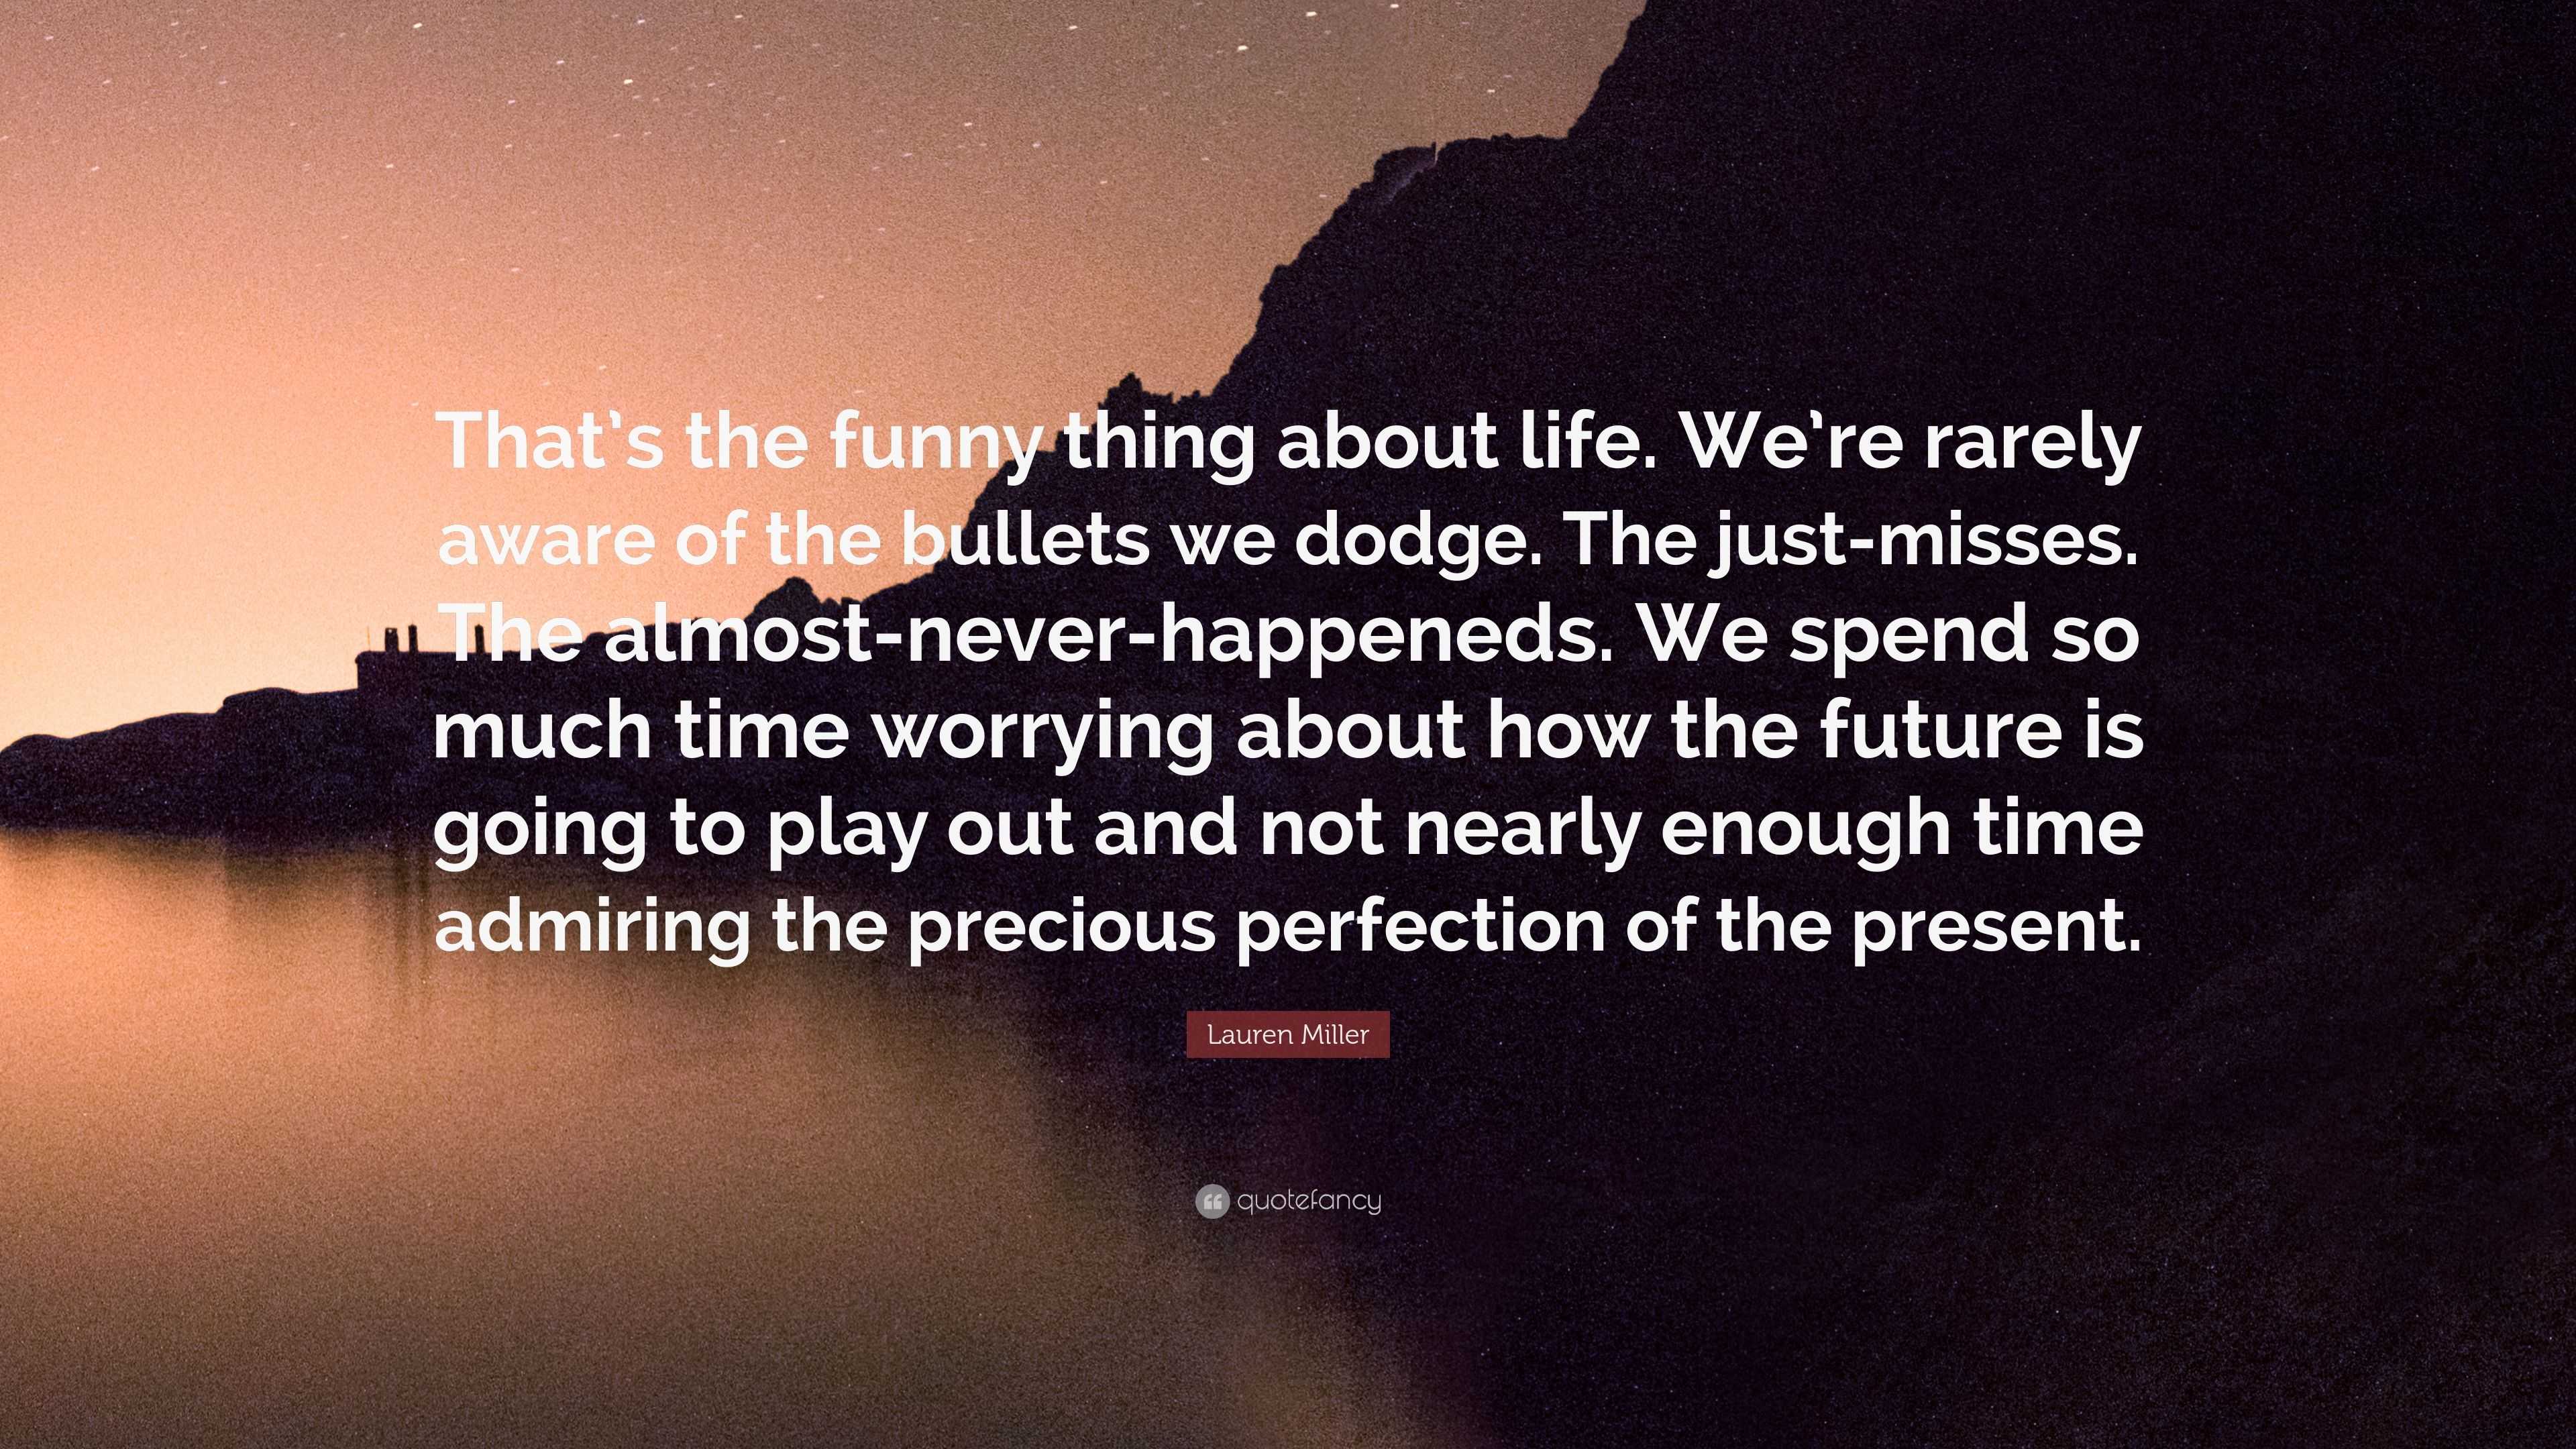 Lauren Miller Quote: “That's the funny thing about life. We're rarely aware  of the bullets we dodge. The just-misses. The almost-never-happene...”